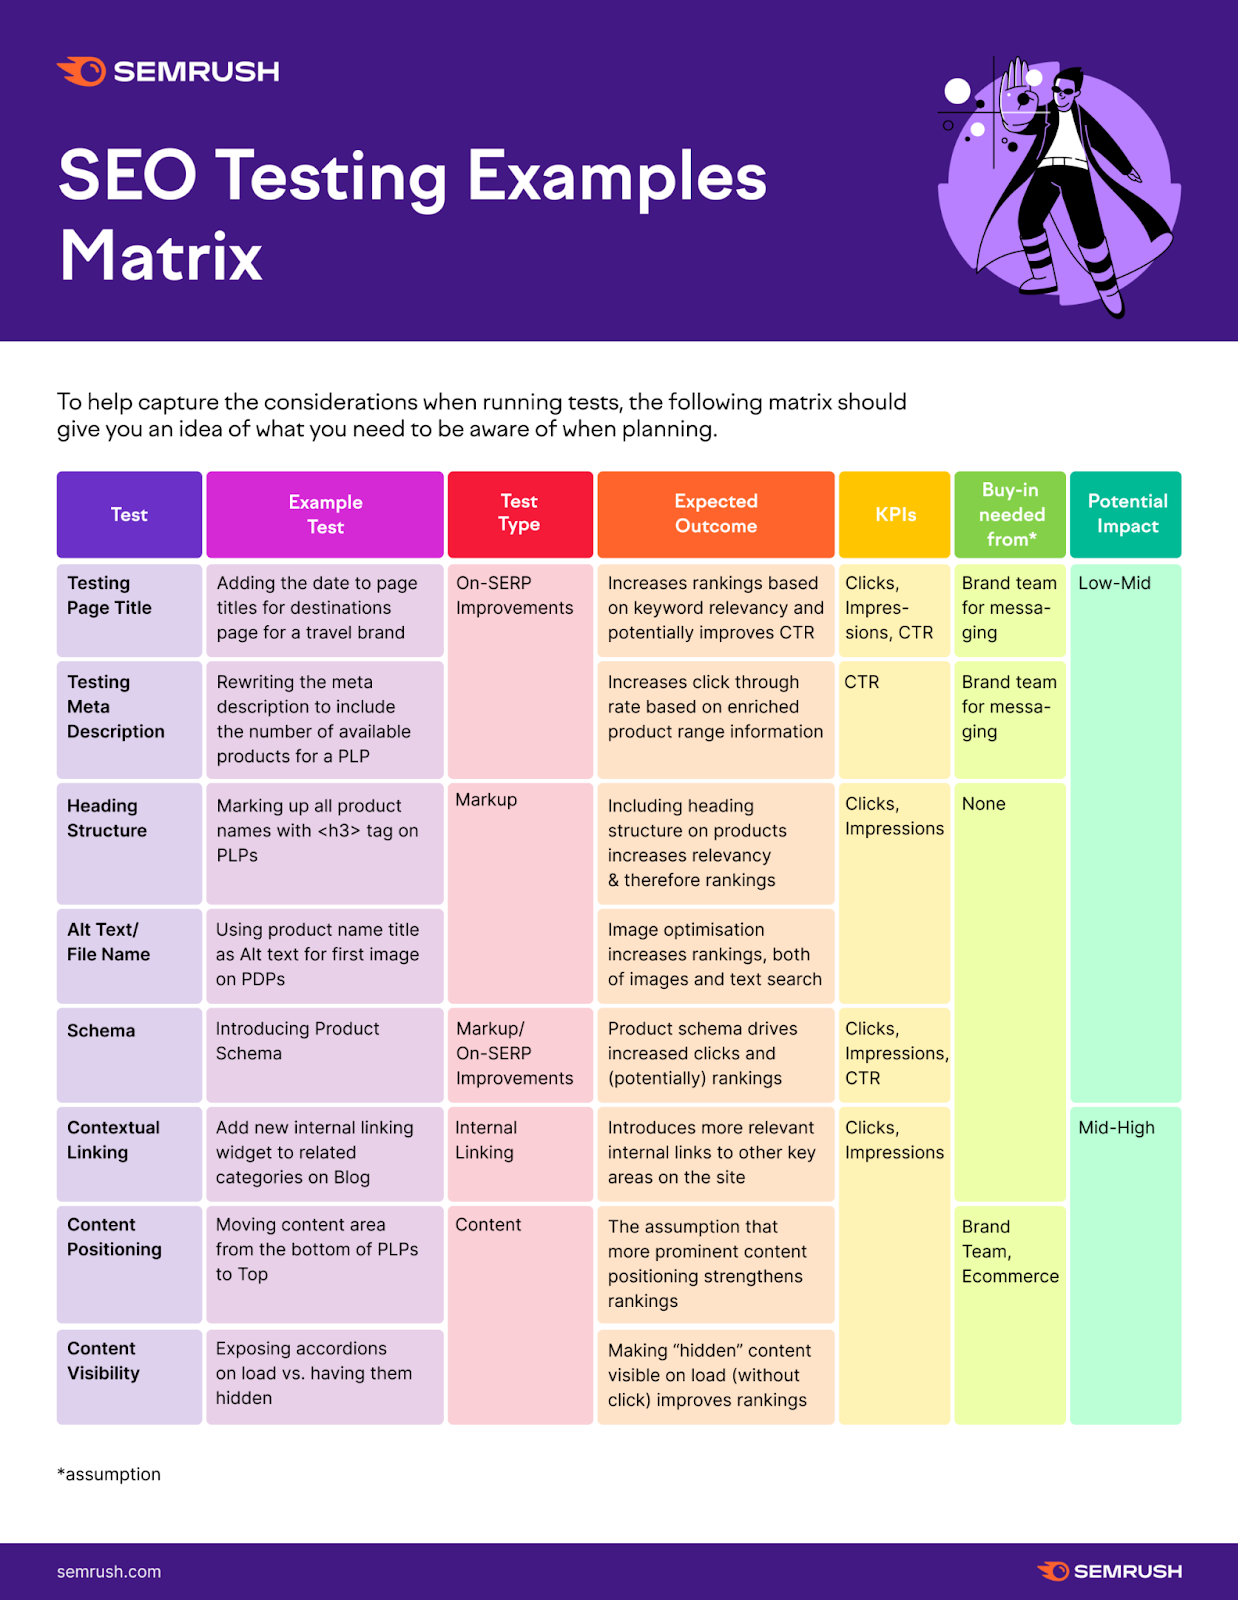 The SEO testing matrix outlines the different page components you can optimize through A/B testing